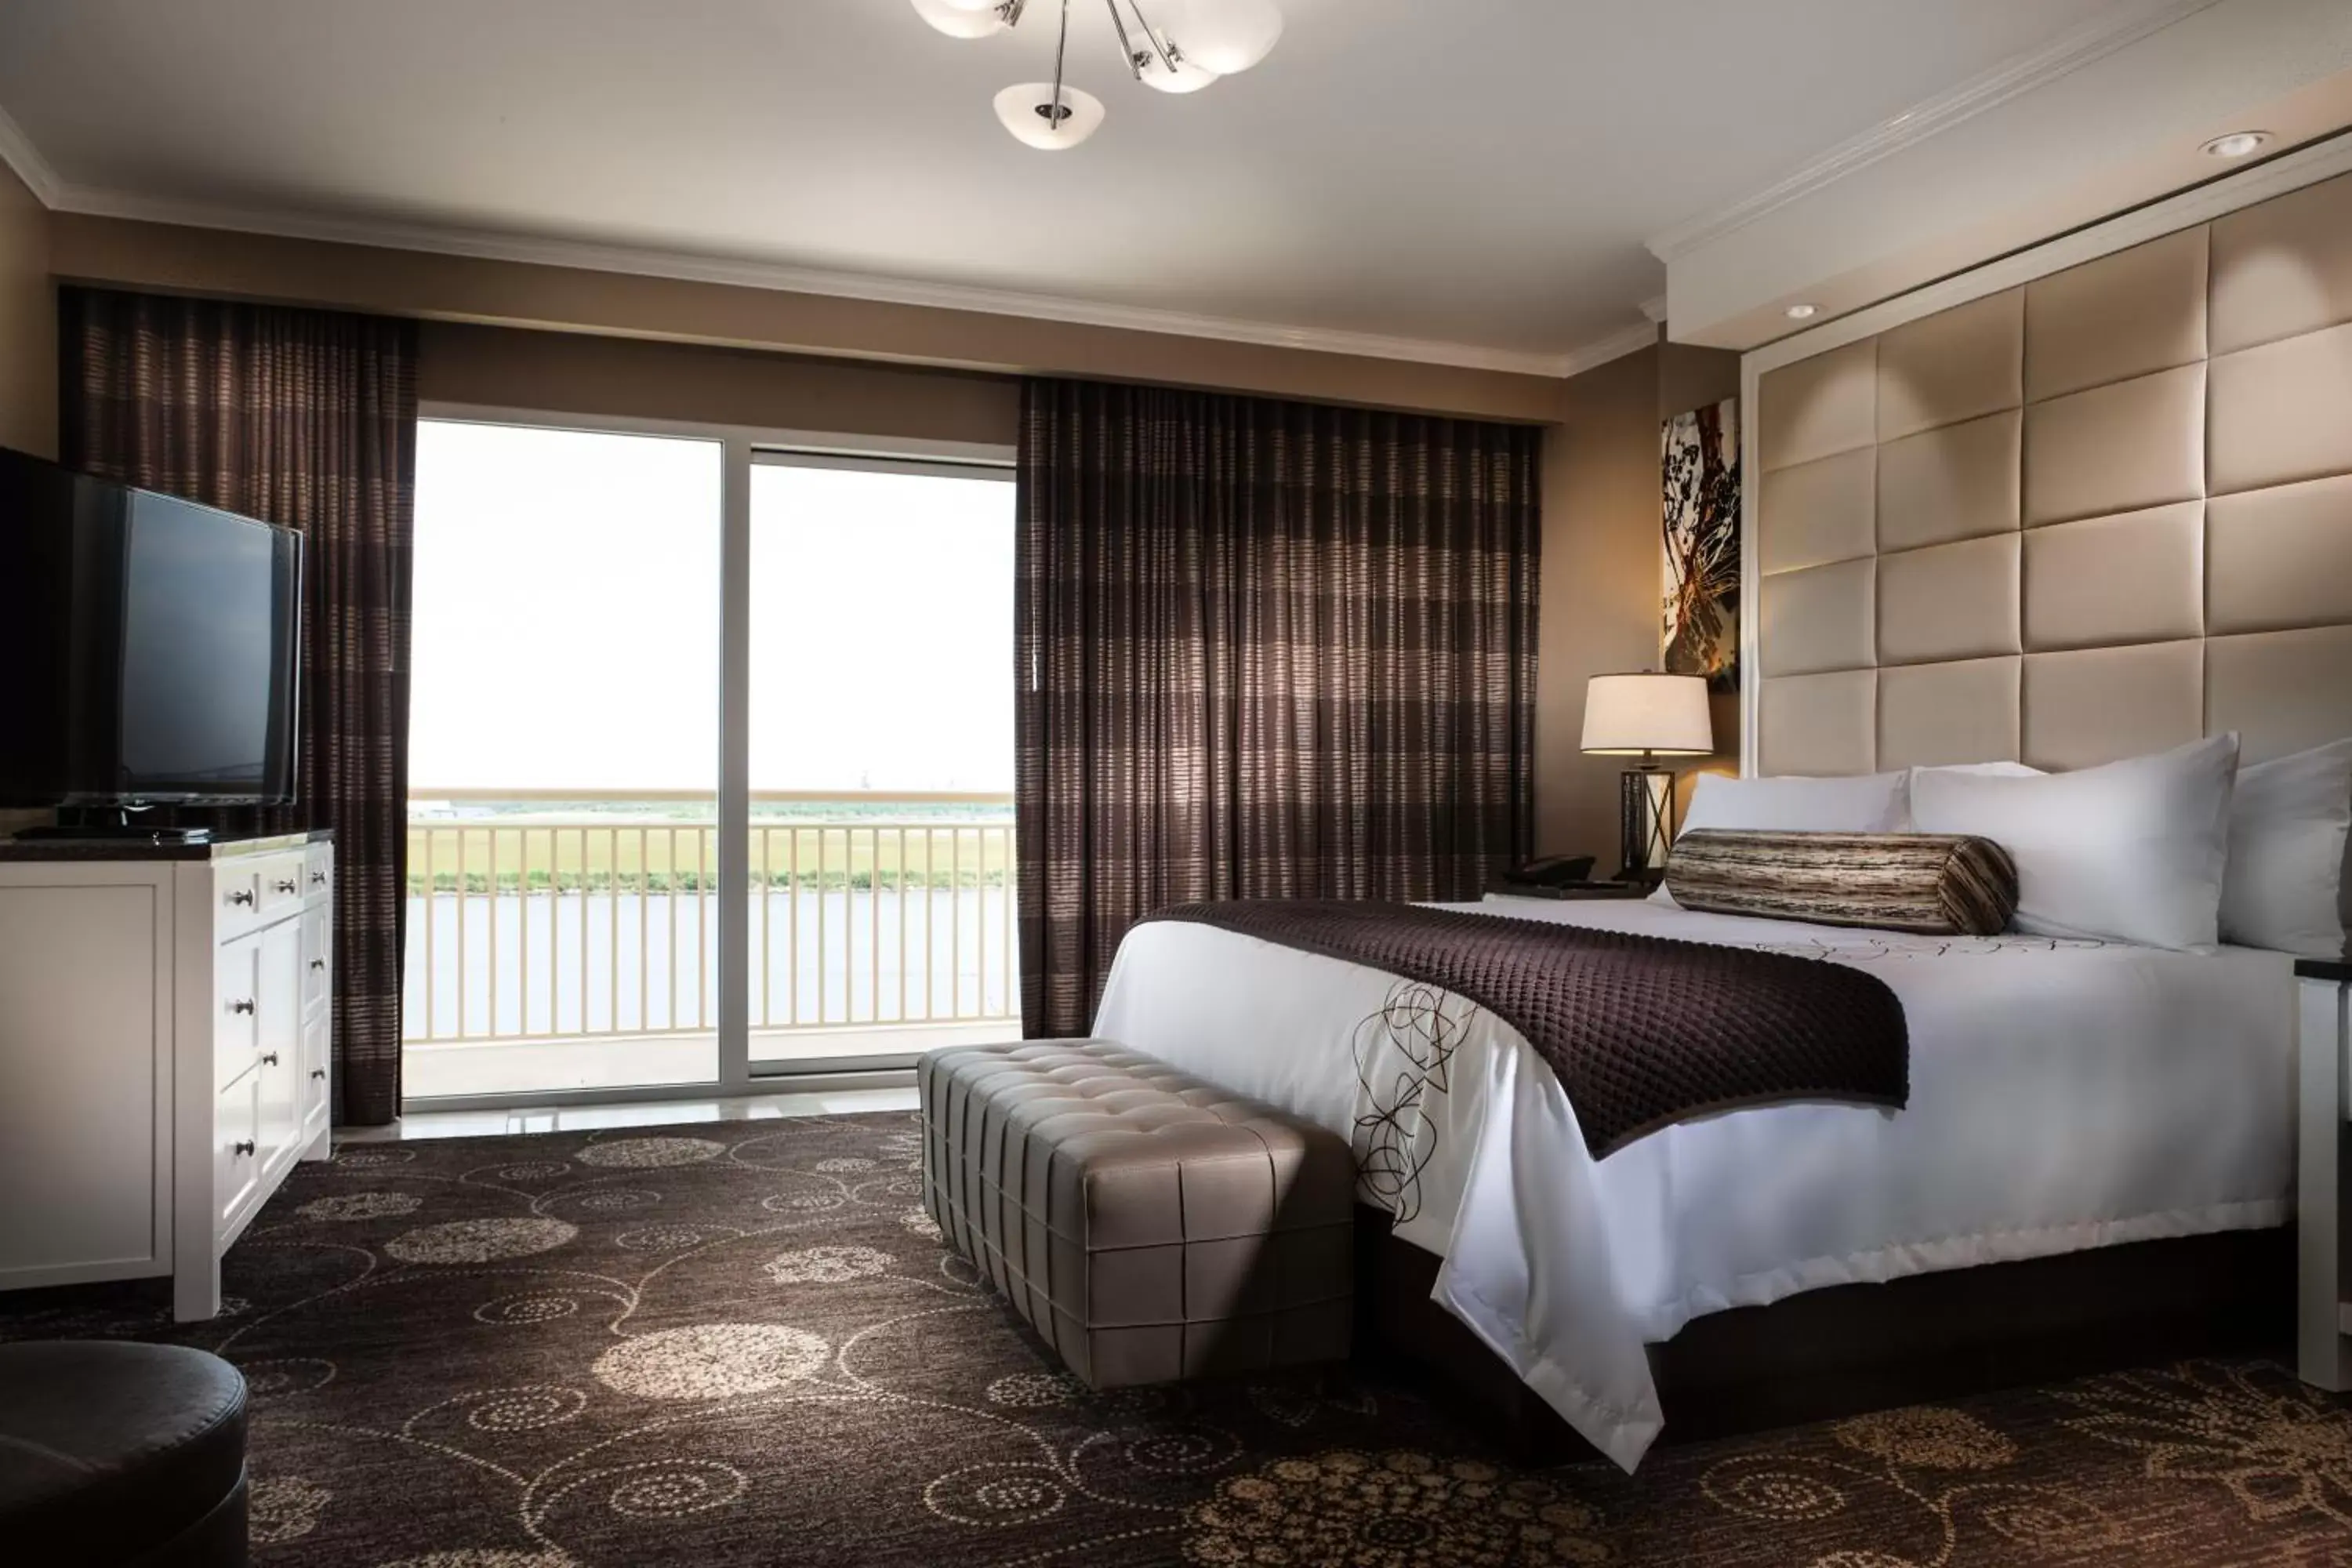 King Room with Lake View in Golden Nugget Lake Charles